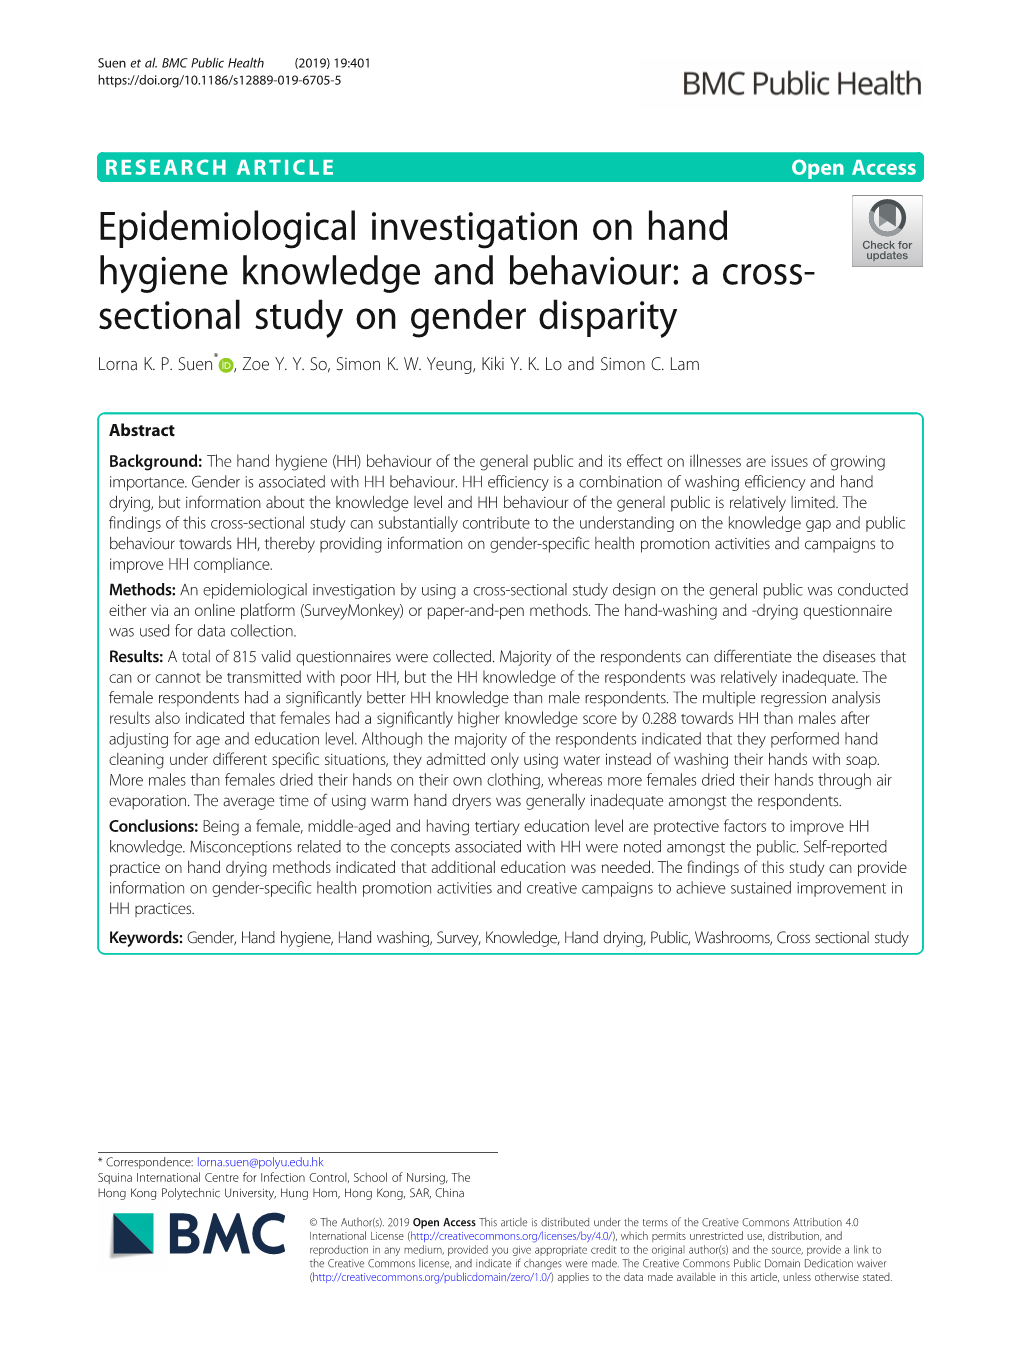 Epidemiological Investigation on Hand Hygiene Knowledge and Behaviour: a Cross- Sectional Study on Gender Disparity Lorna K